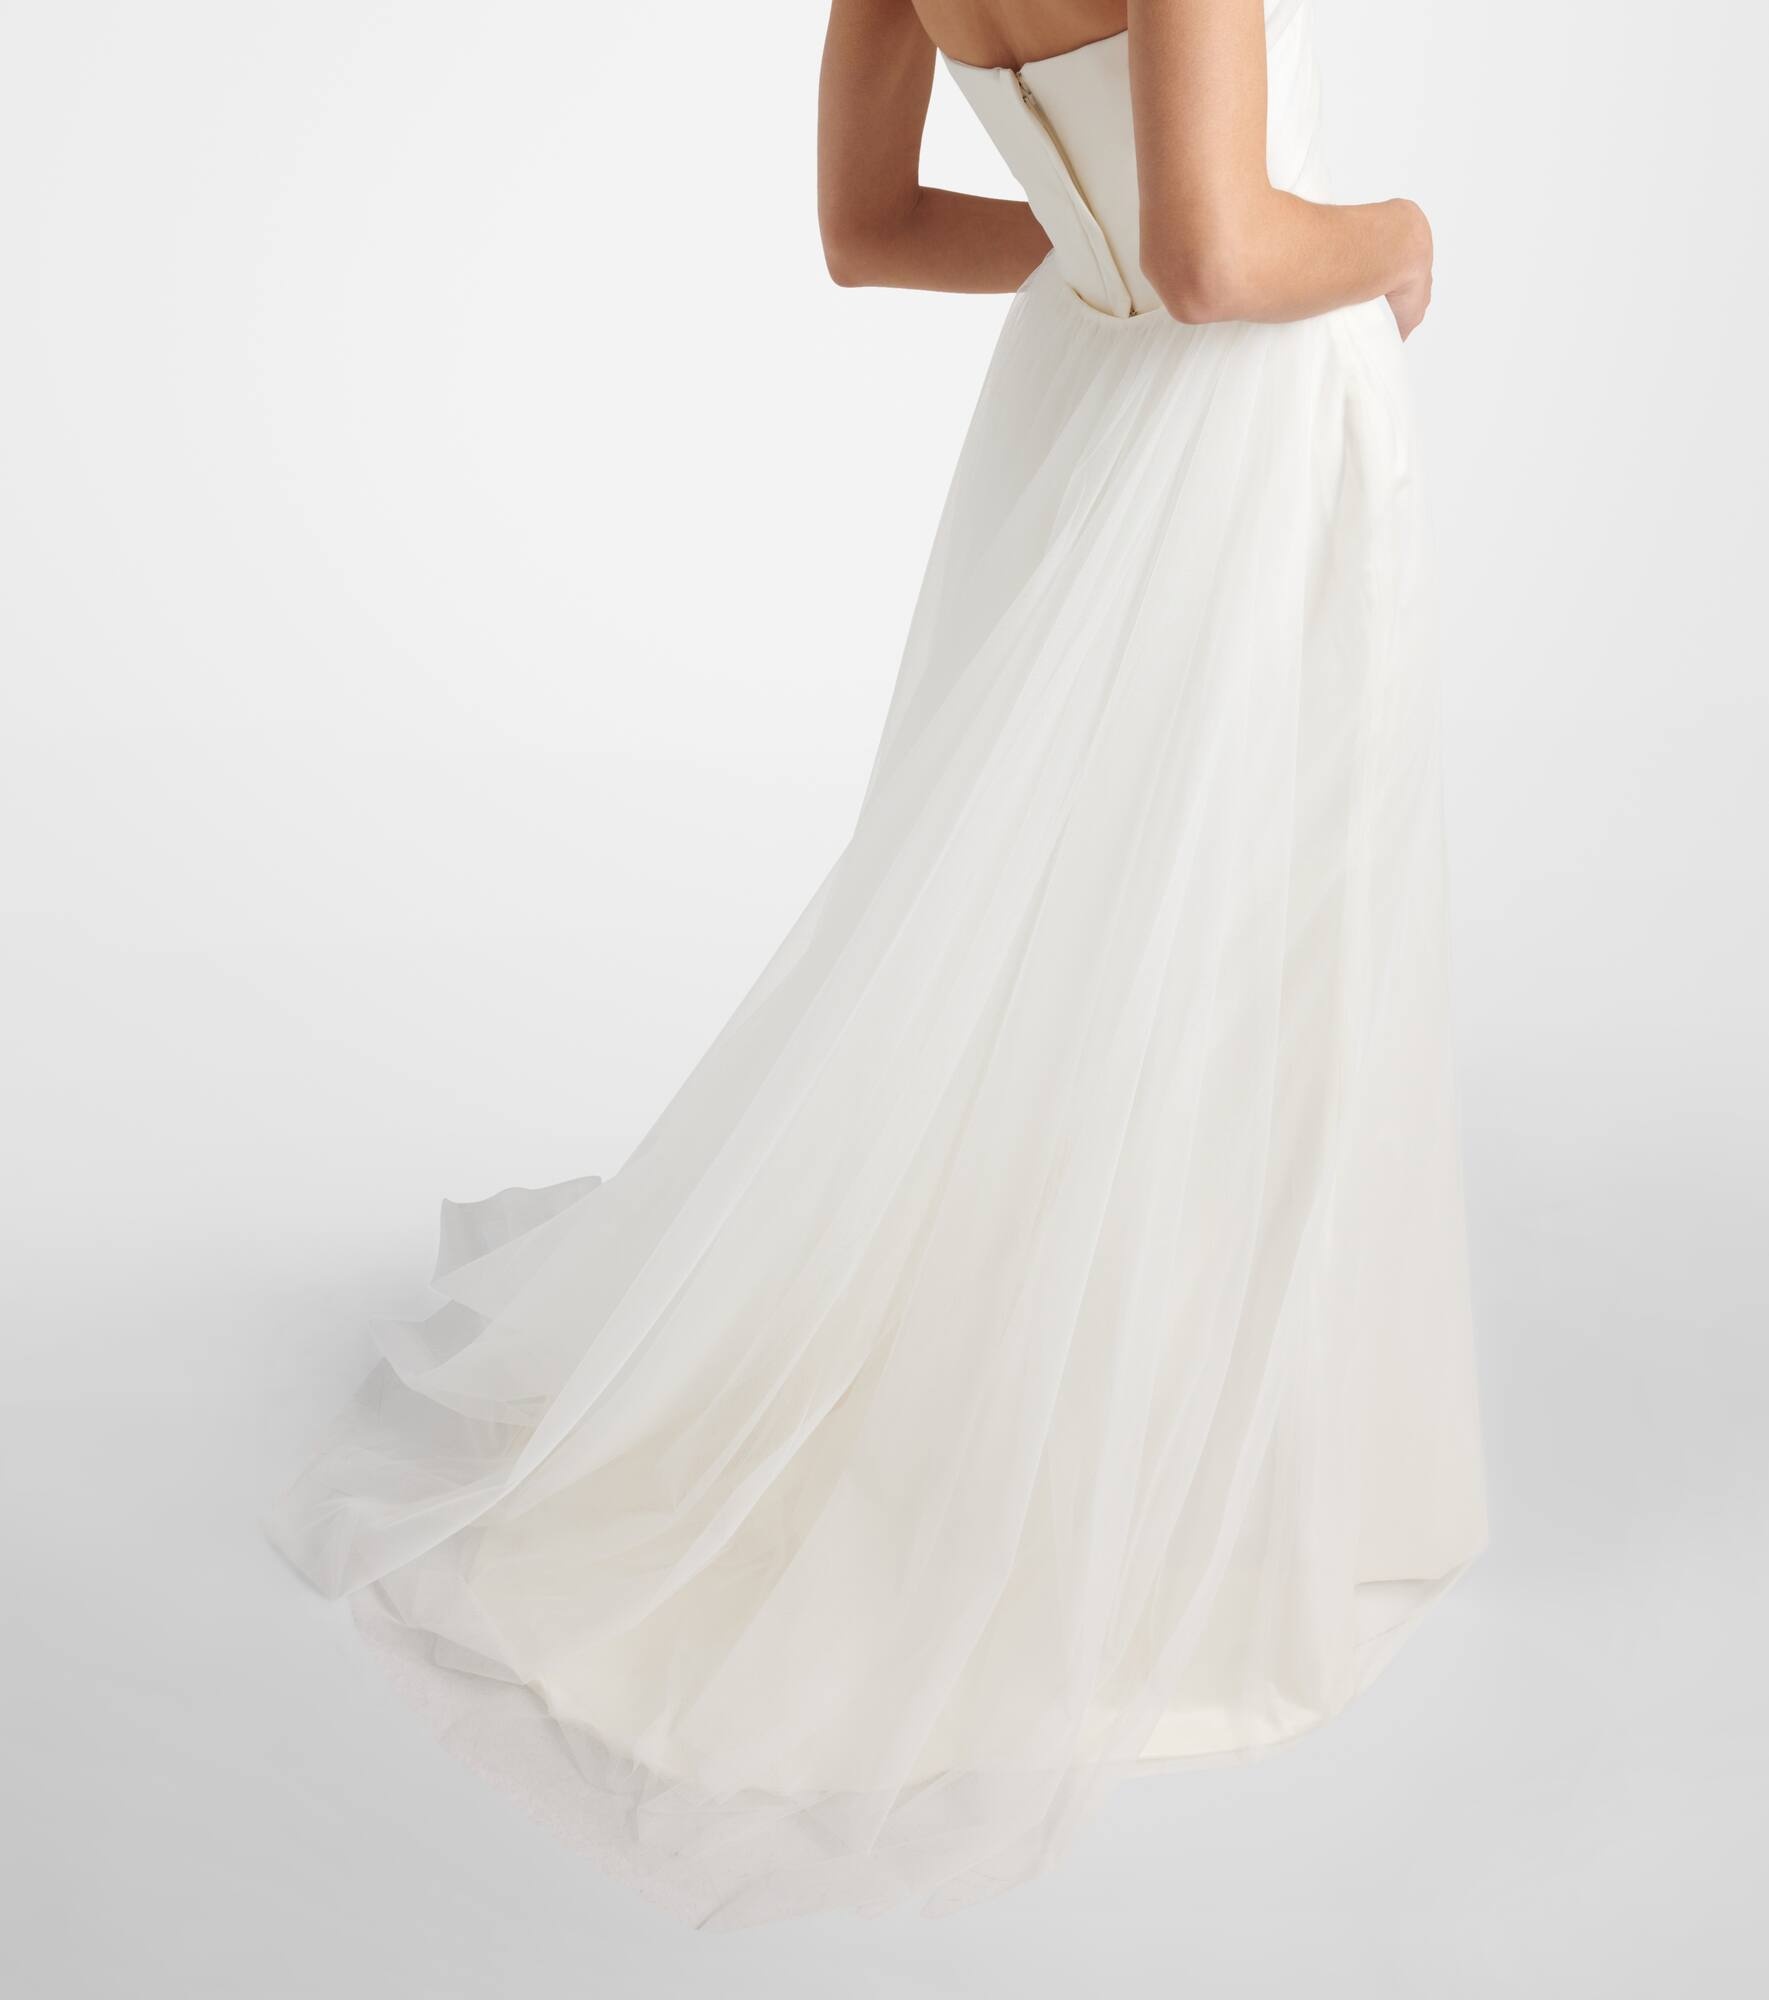 Bridal Rhea satin and tulle gown - 5